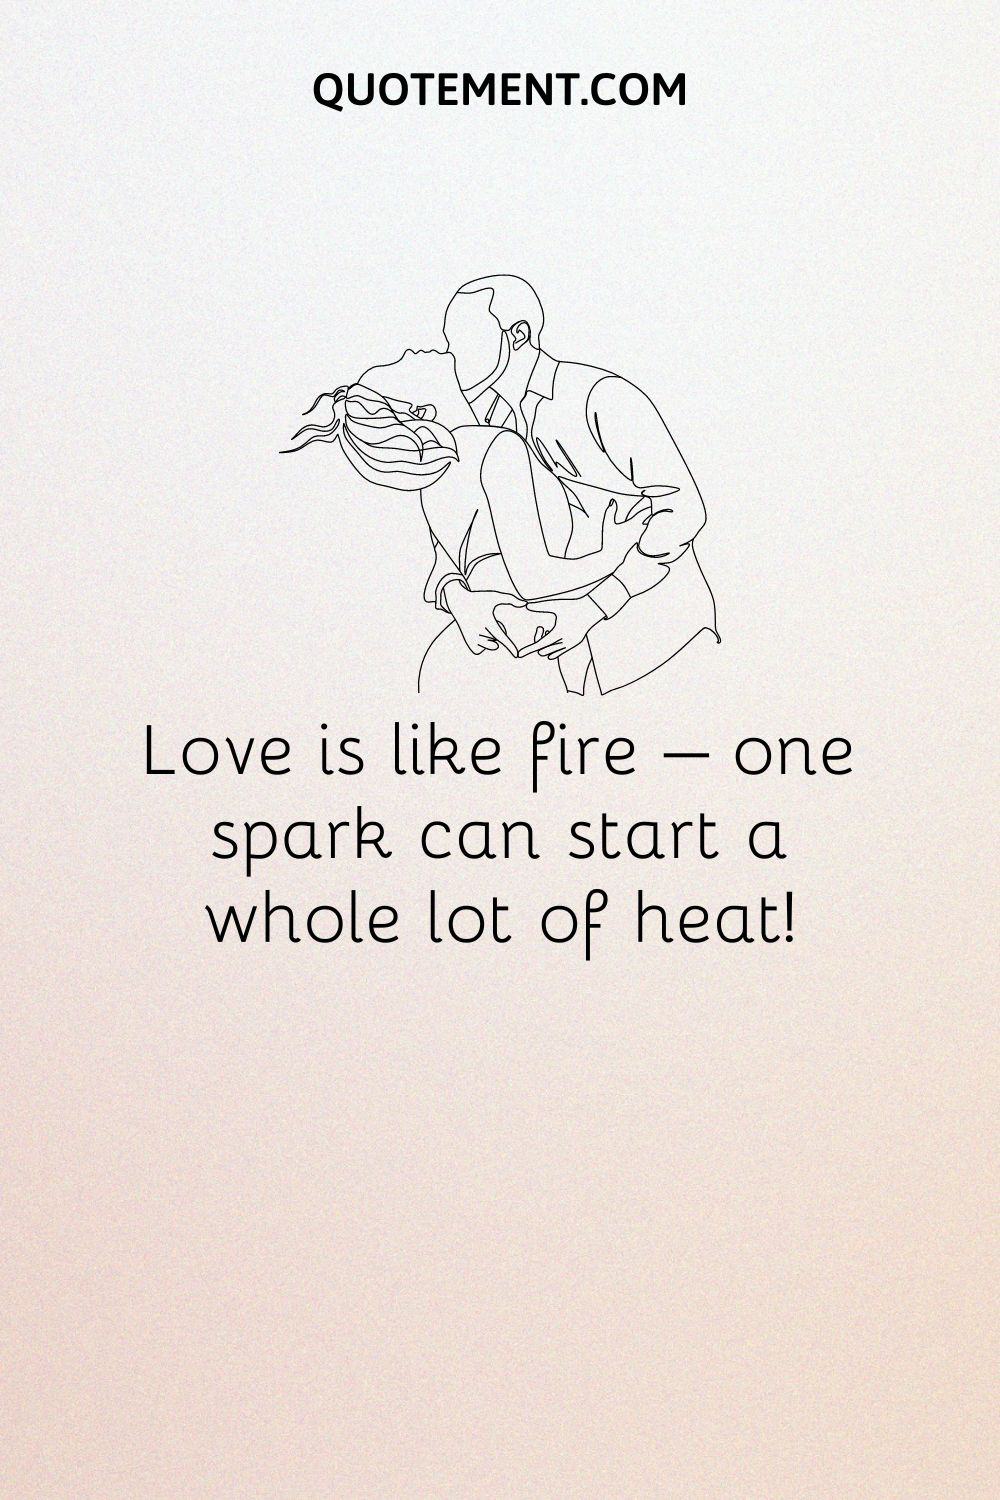 Love is like fire – one spark can start a whole lot of heat